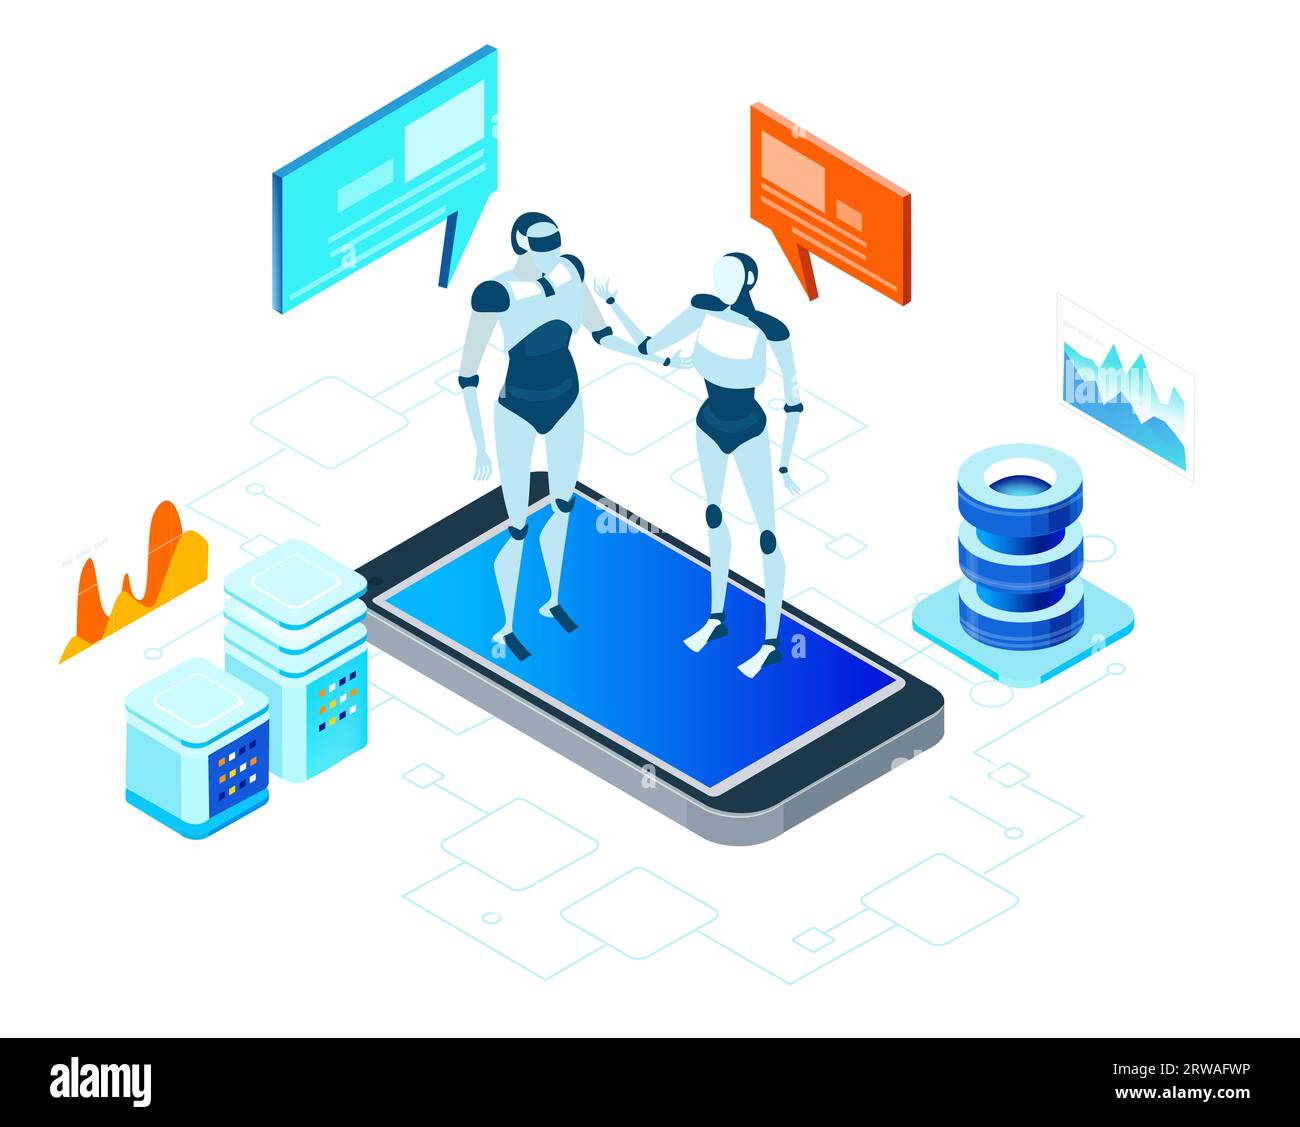 Robots and artificial intelligence concept infographic. Robots working in server room, big data. Human VS robots Stock Photo